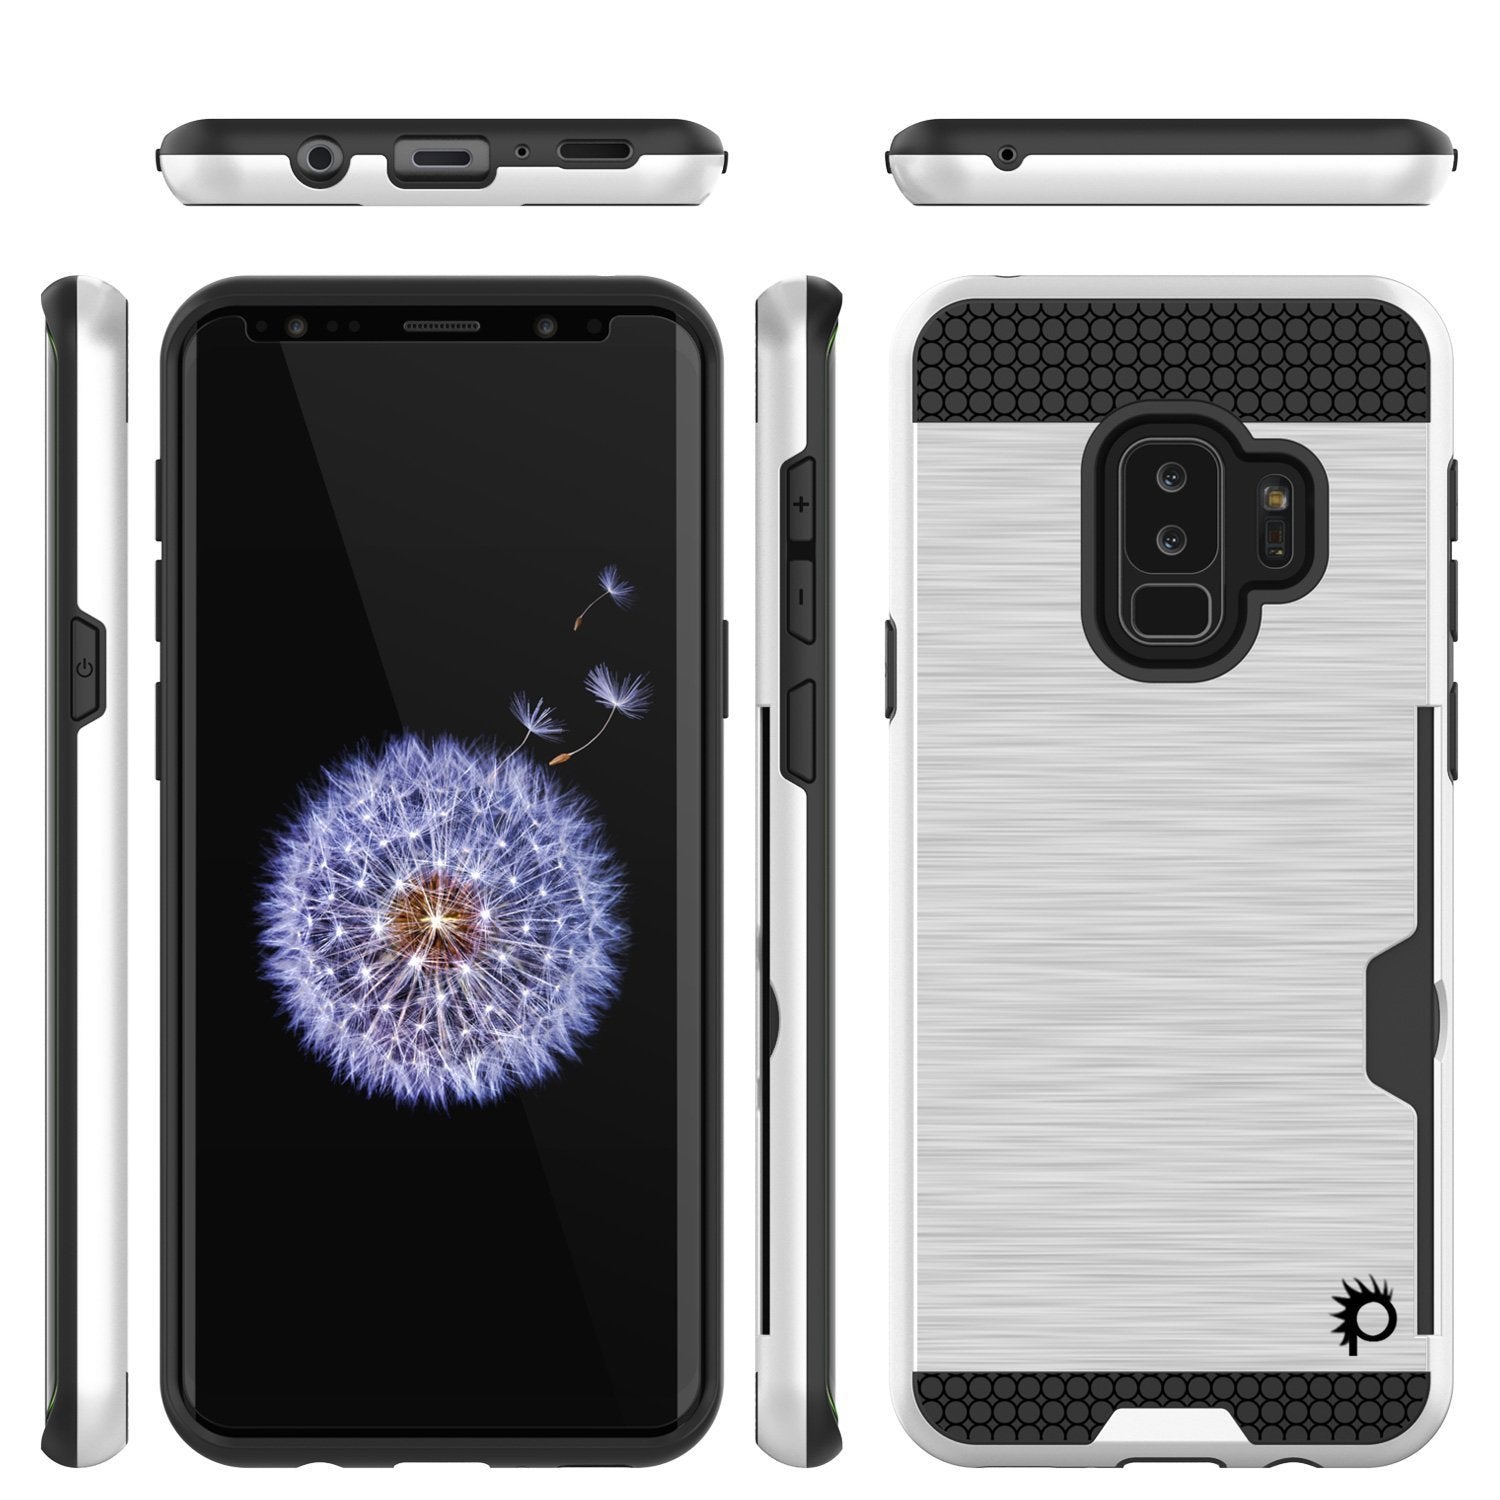 Galaxy S9 Plus Case, PUNKcase [SLOT Series] [Slim Fit] Dual-Layer Armor Cover w/Integrated Anti-Shock System, Credit Card Slot & Screen Protector [White]